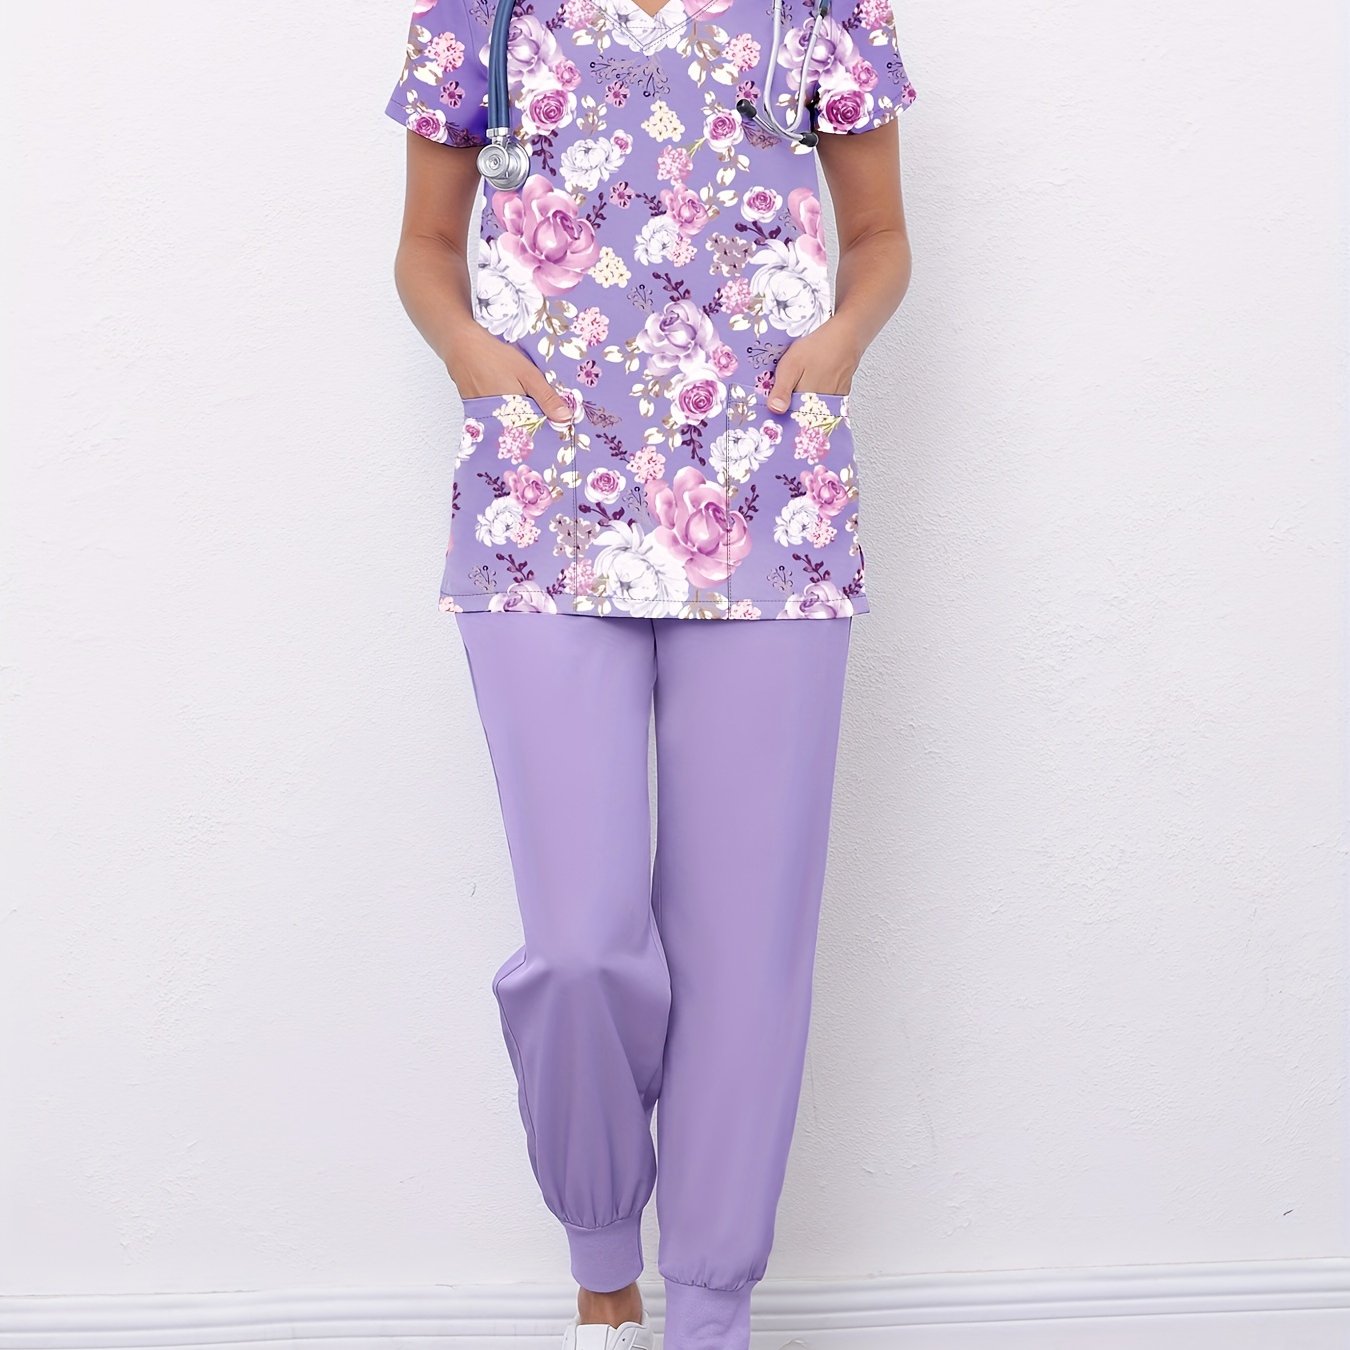 Cute Elephant Print Stretchy Scrubs Top Functional Patched - Temu